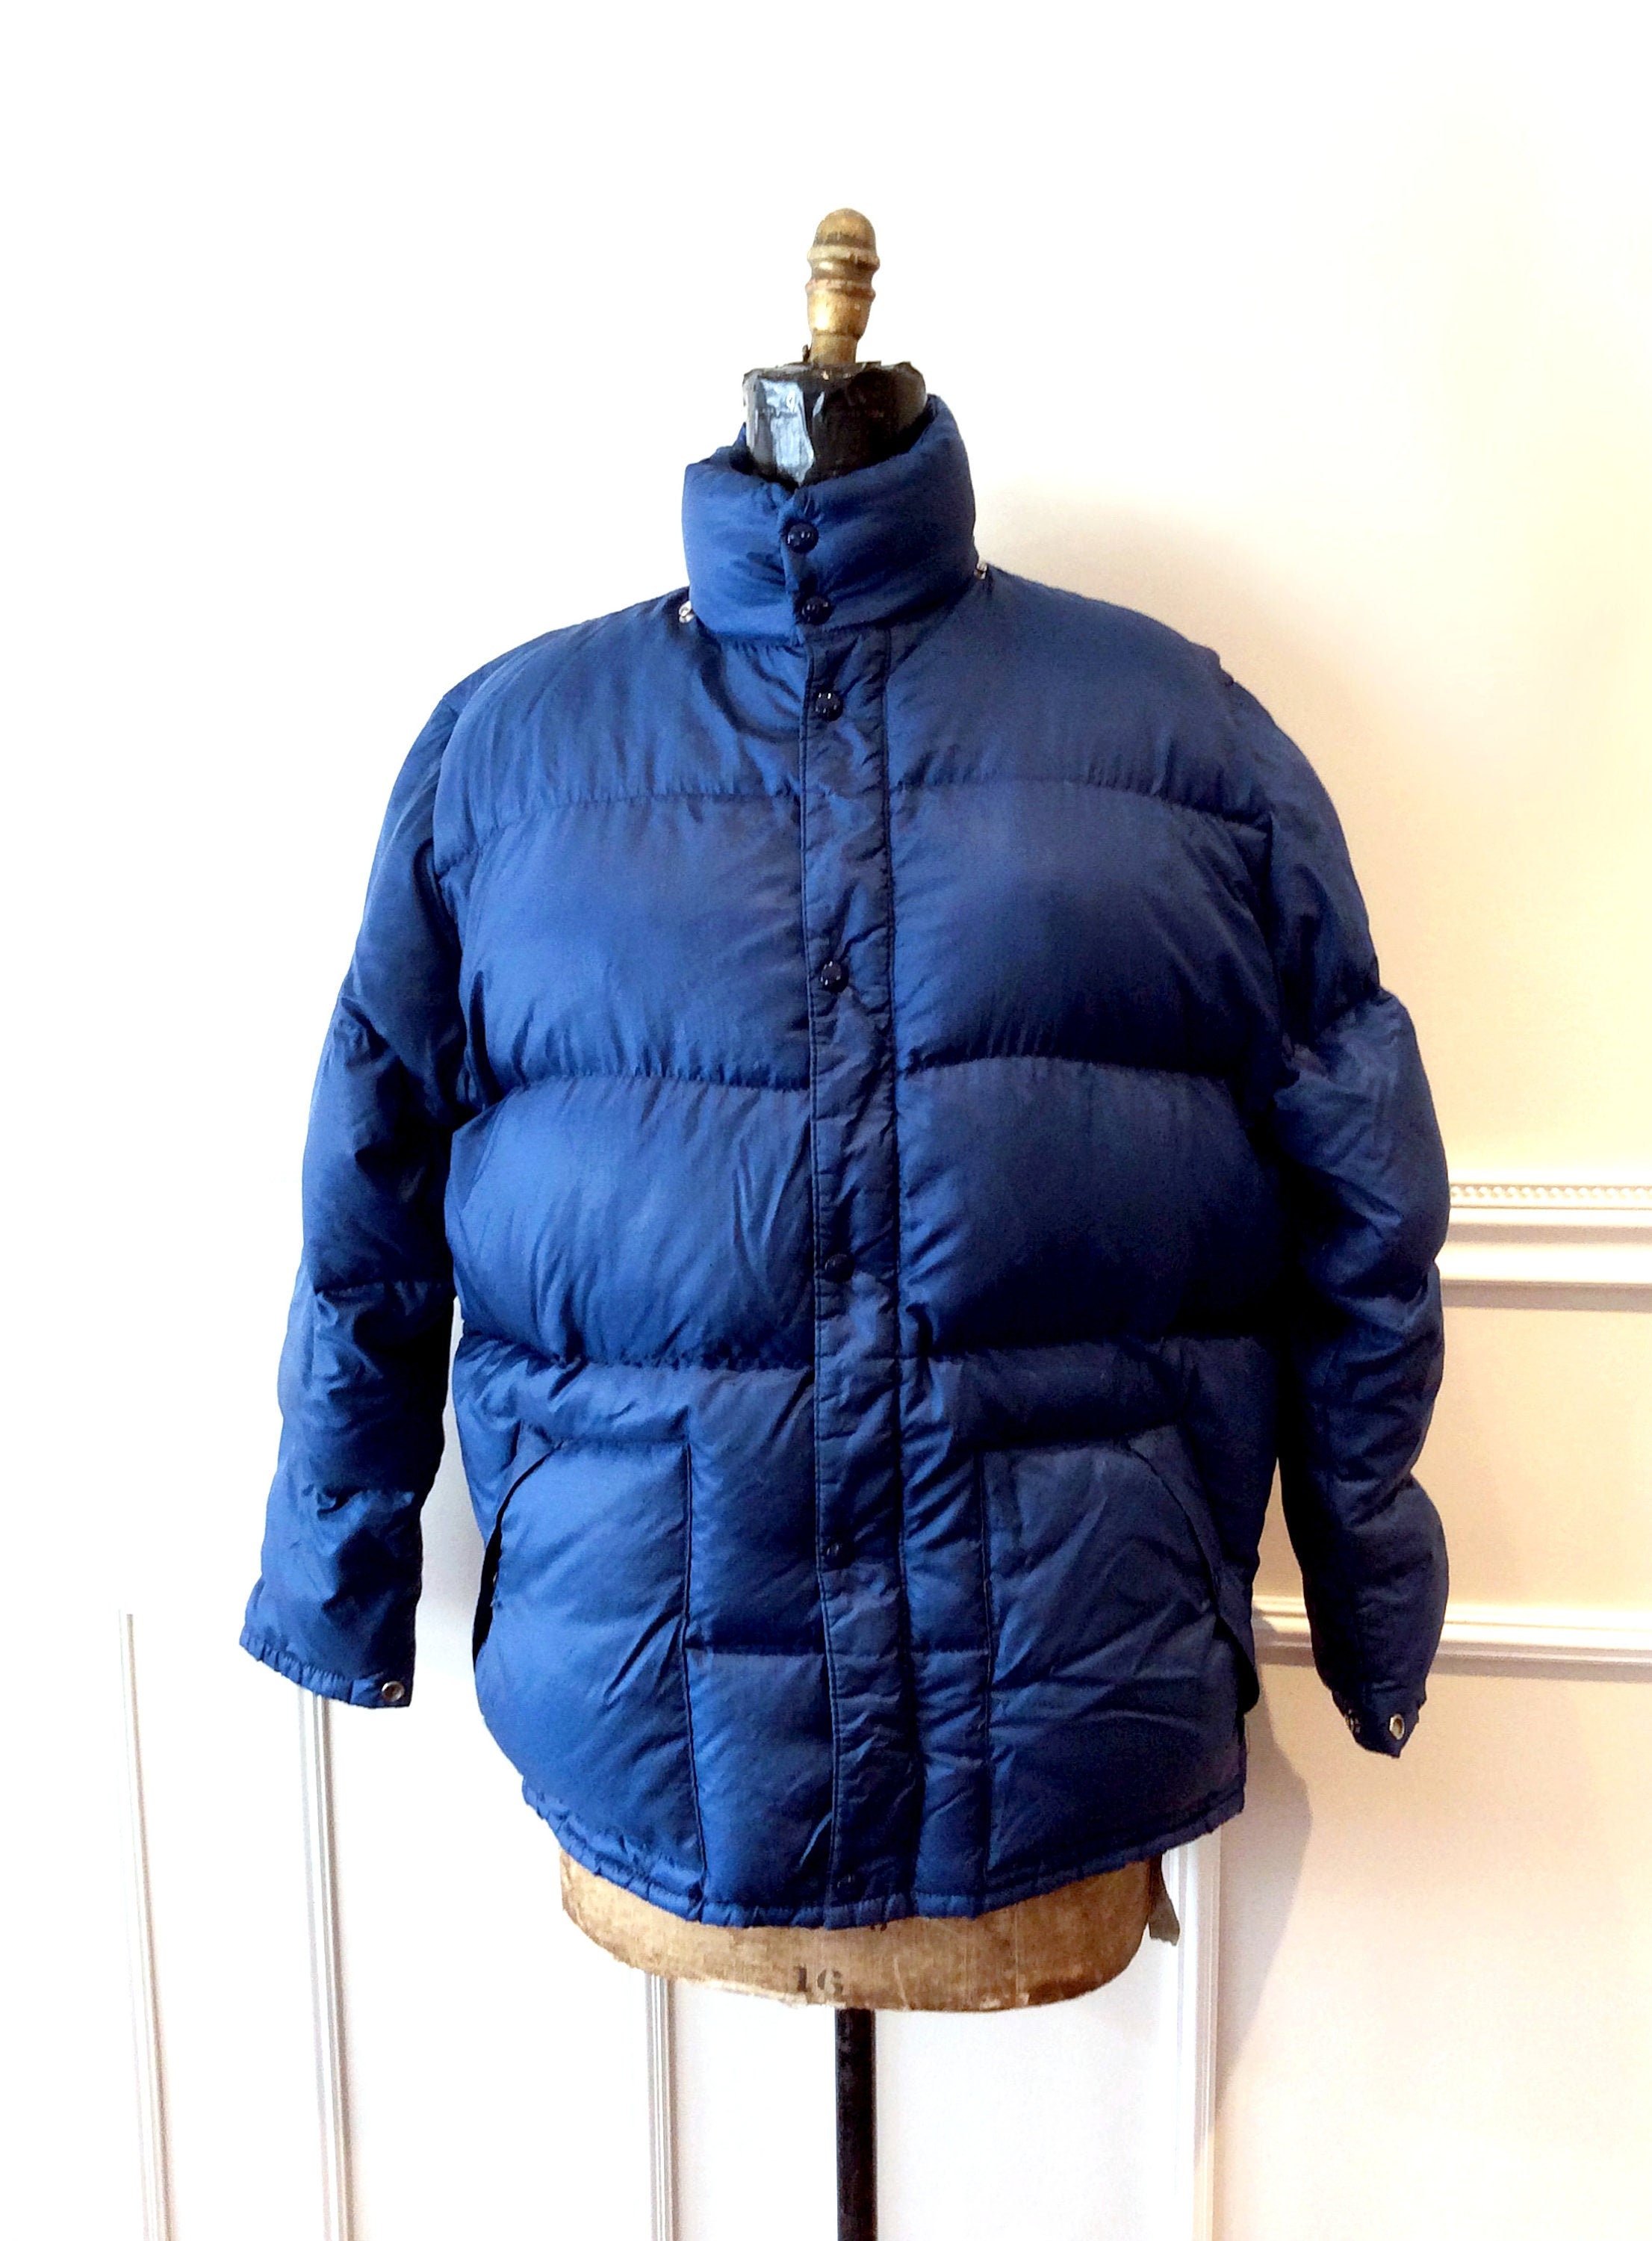 Vintage Puffer Jacket / Blue Goose Down Ski Jacket / 1980s Early 90s /  Oversized Plus Size Chest 50 / Woods Brand Made in Canada -  Canada